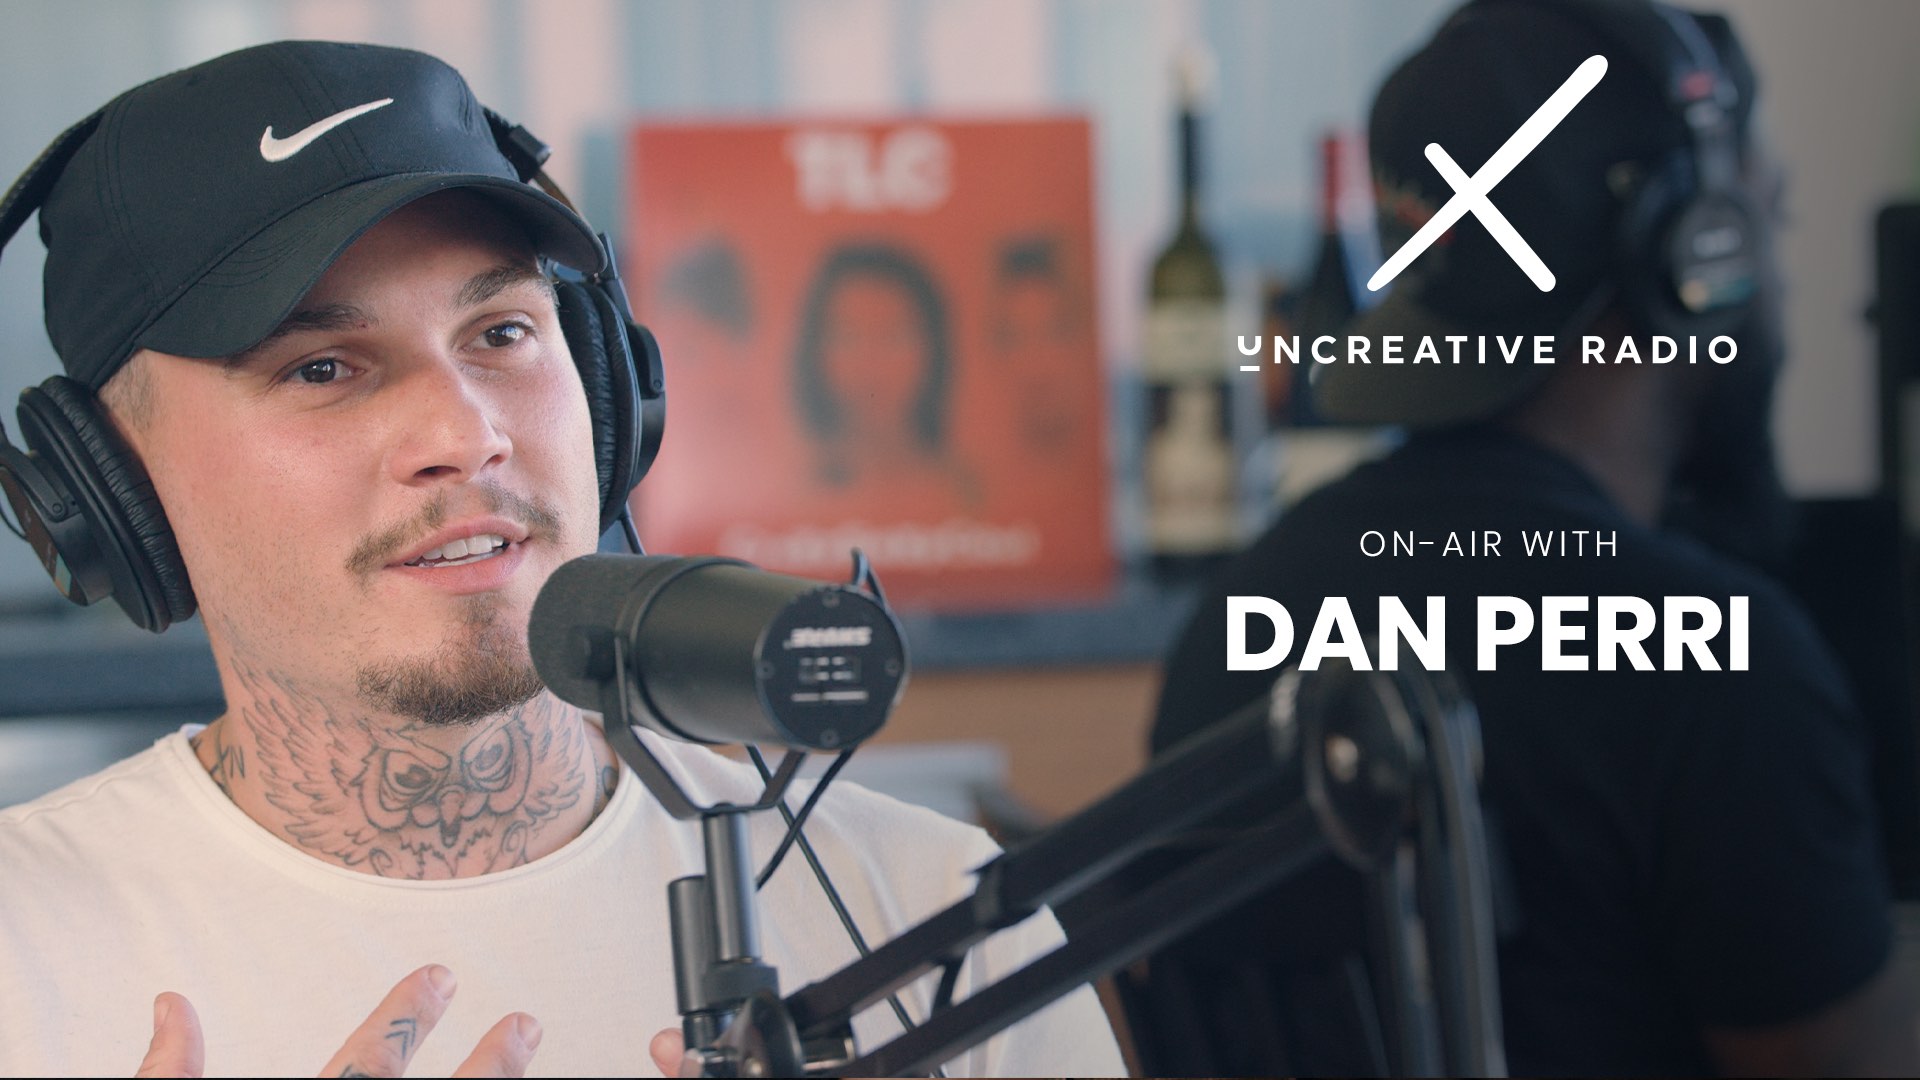 Uncreative Radio on air with Dan Perri with owl tattoo on neck wearing black cap and headphones by microphone